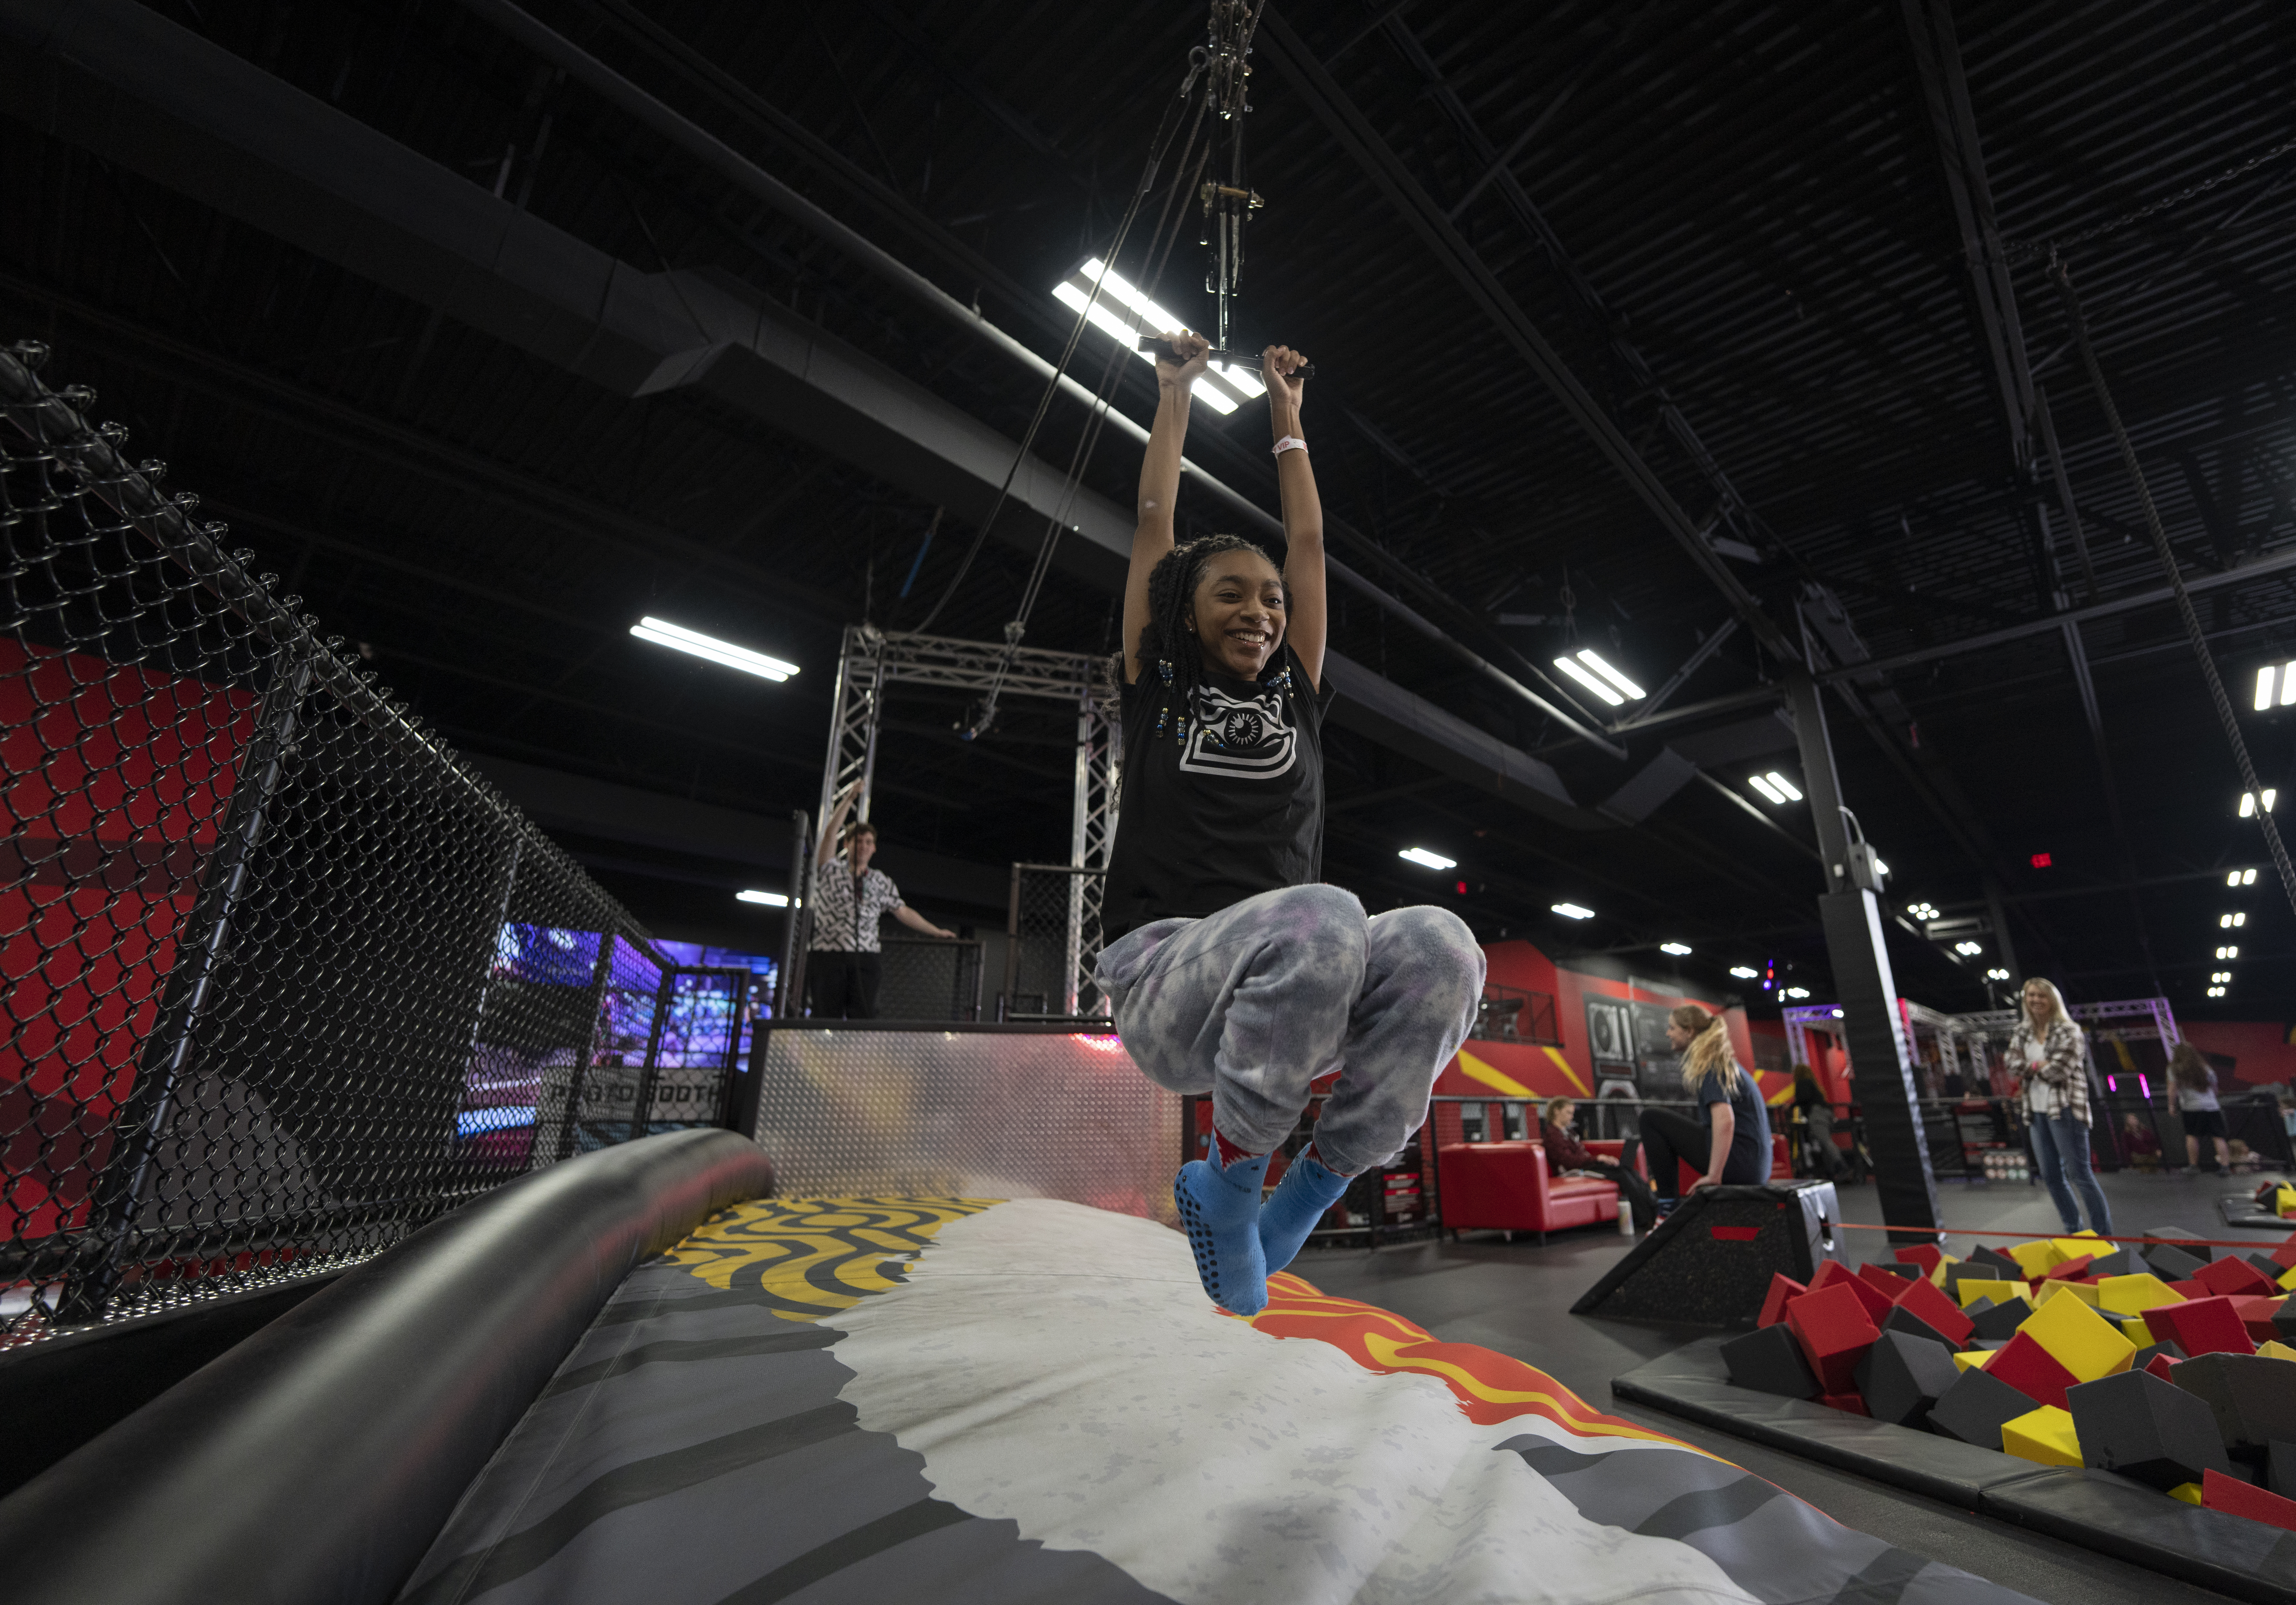 Over 100 Excited Kids Having Fun At Defy Gravity! – Southern CC, Inc.